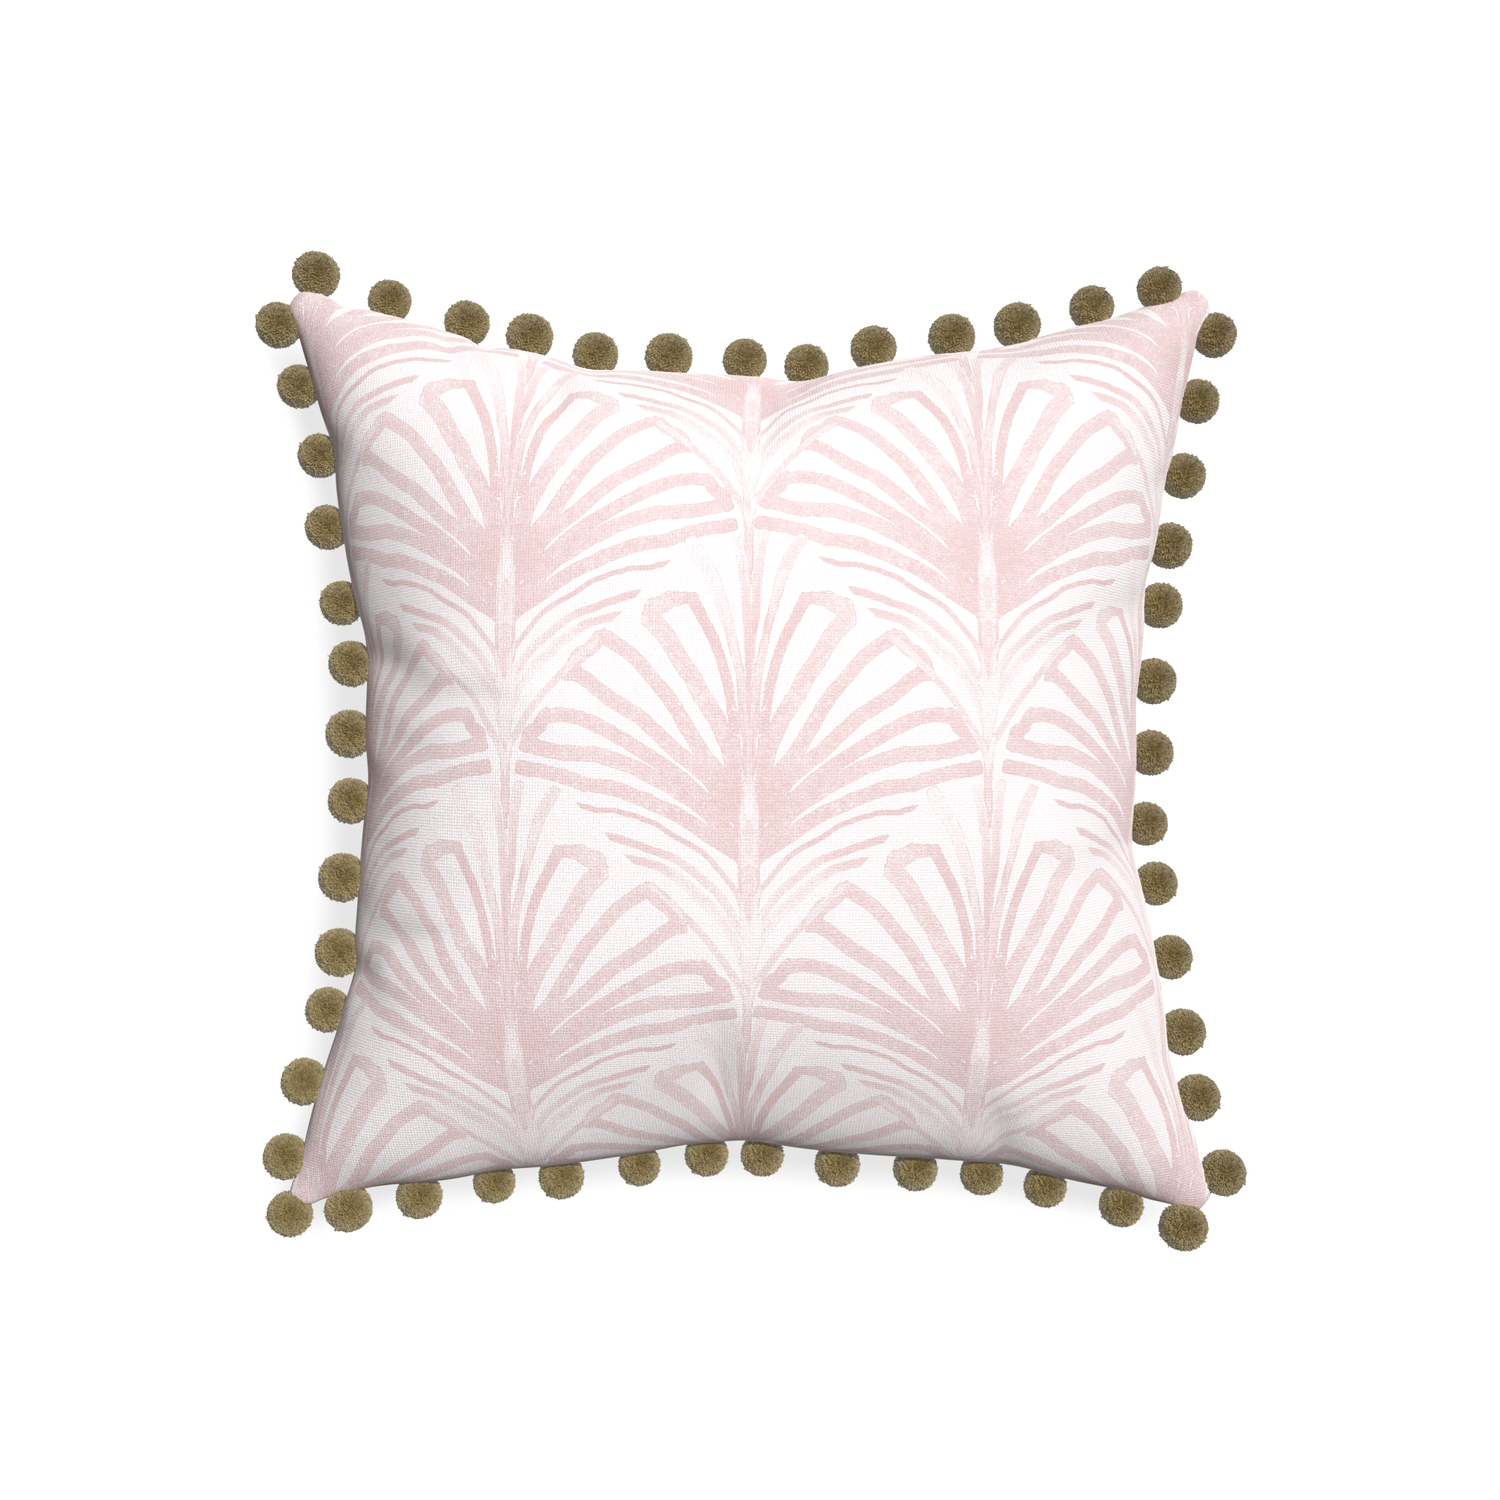 20-square suzy rose custom pillow with olive pom pom on white background